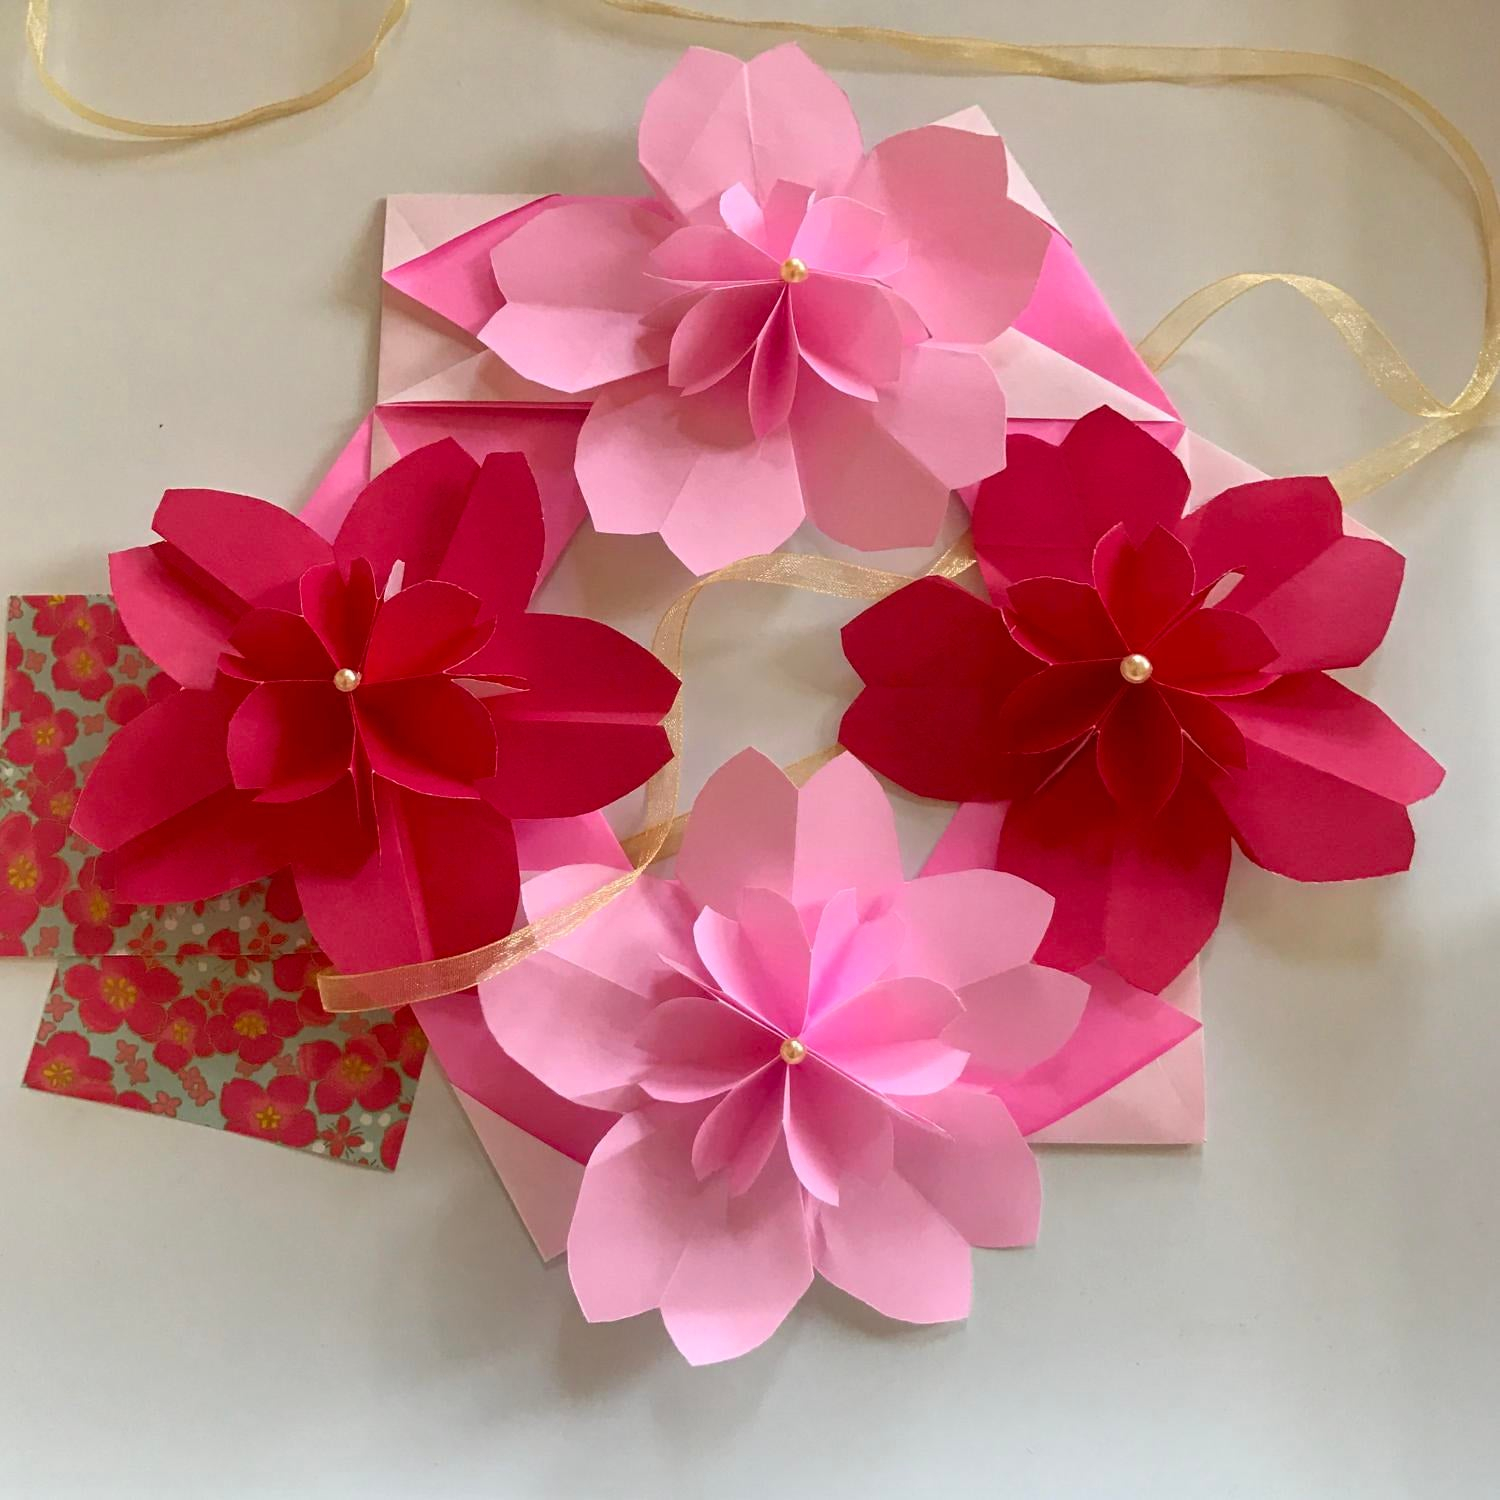 Origami Cherry Blossom Mothers Day Origami Cherry Blossom Wreath